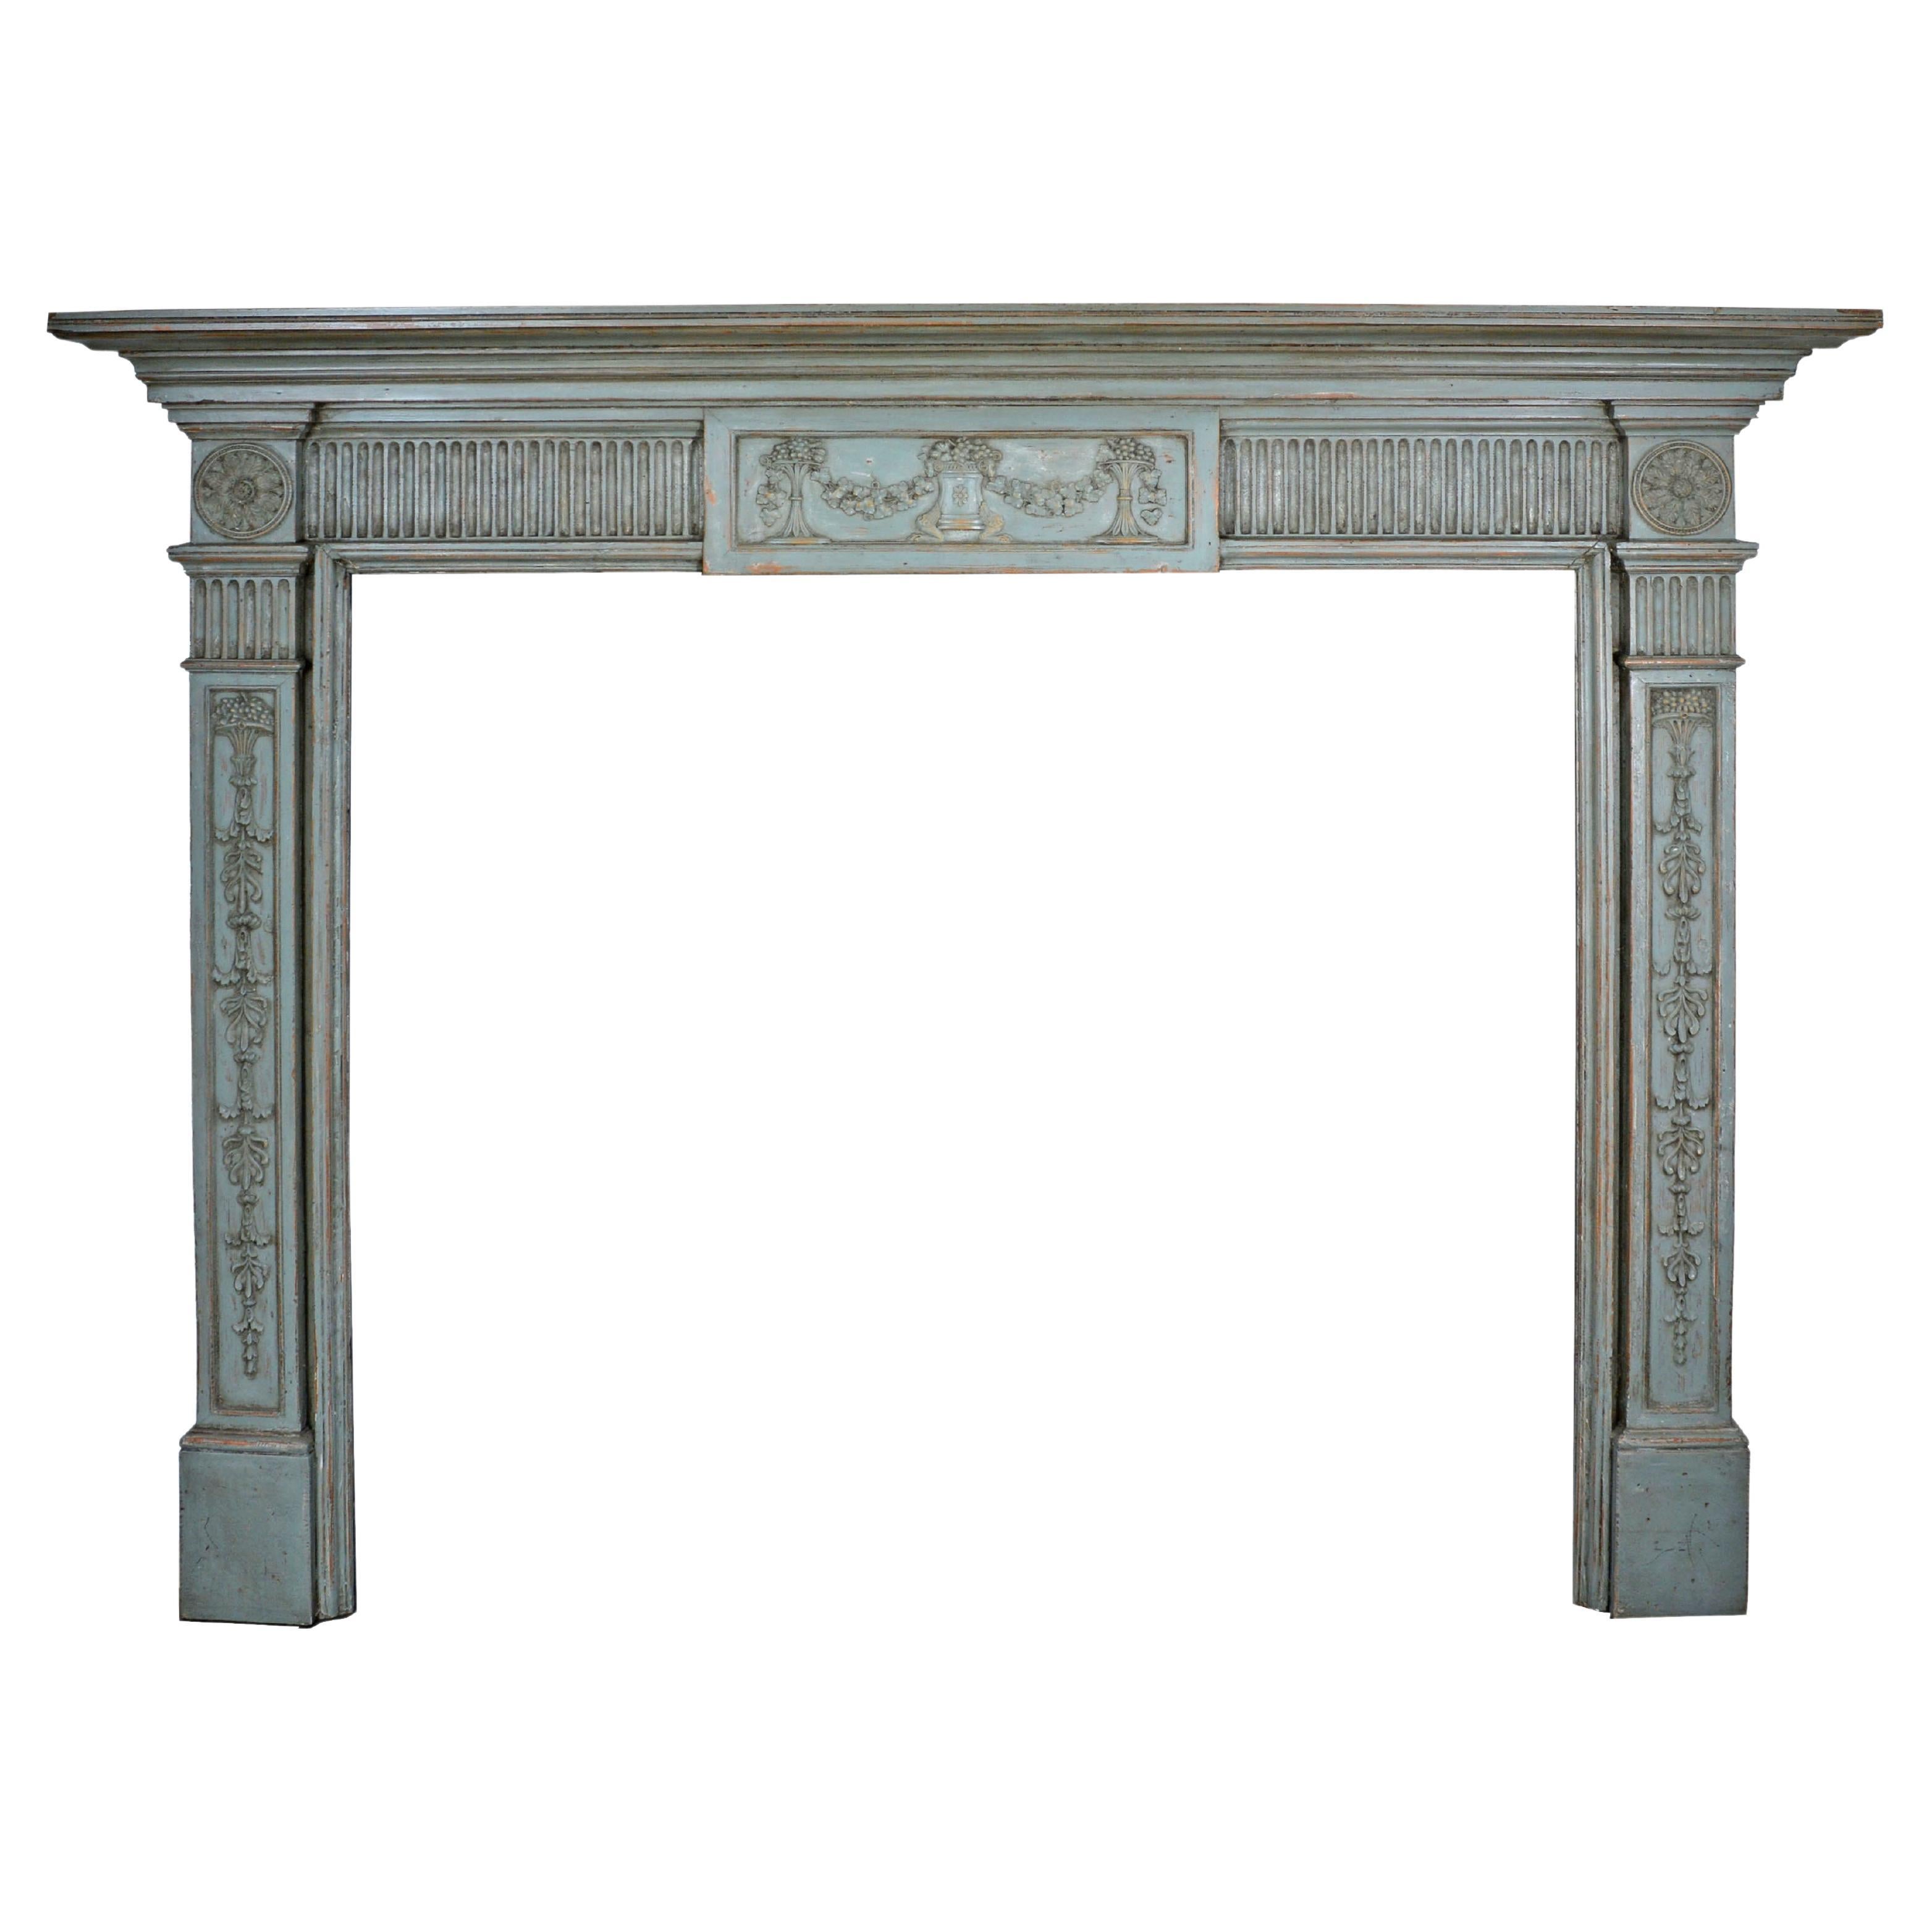 Georgian neo-classical fireplace chimney piece, or mantle piece